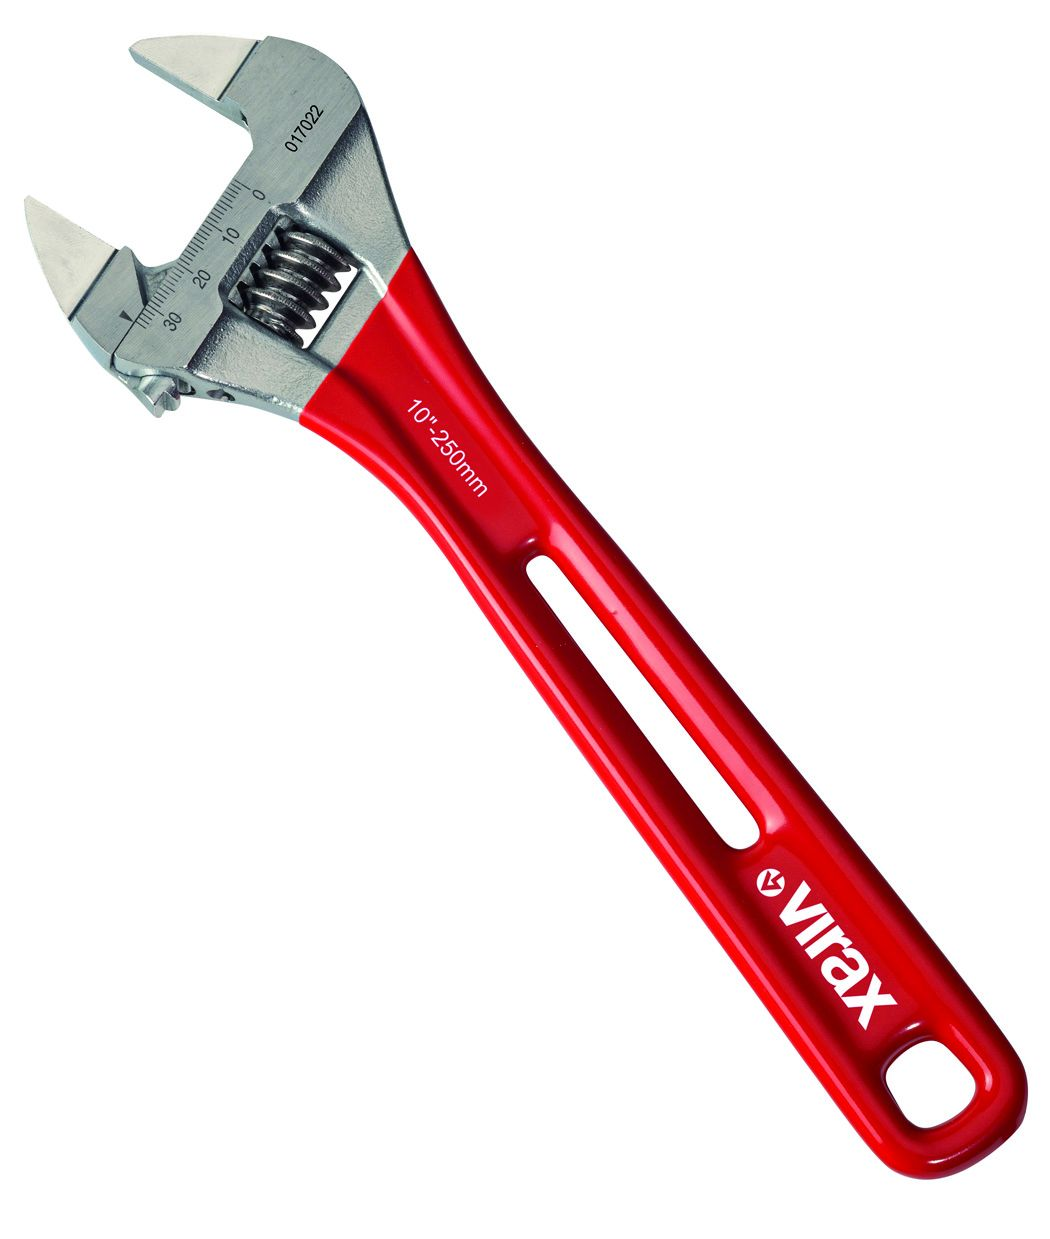 Virax Adjustable Spanner, 207 mm Overall Length, 30mm Max Jaw Capacity